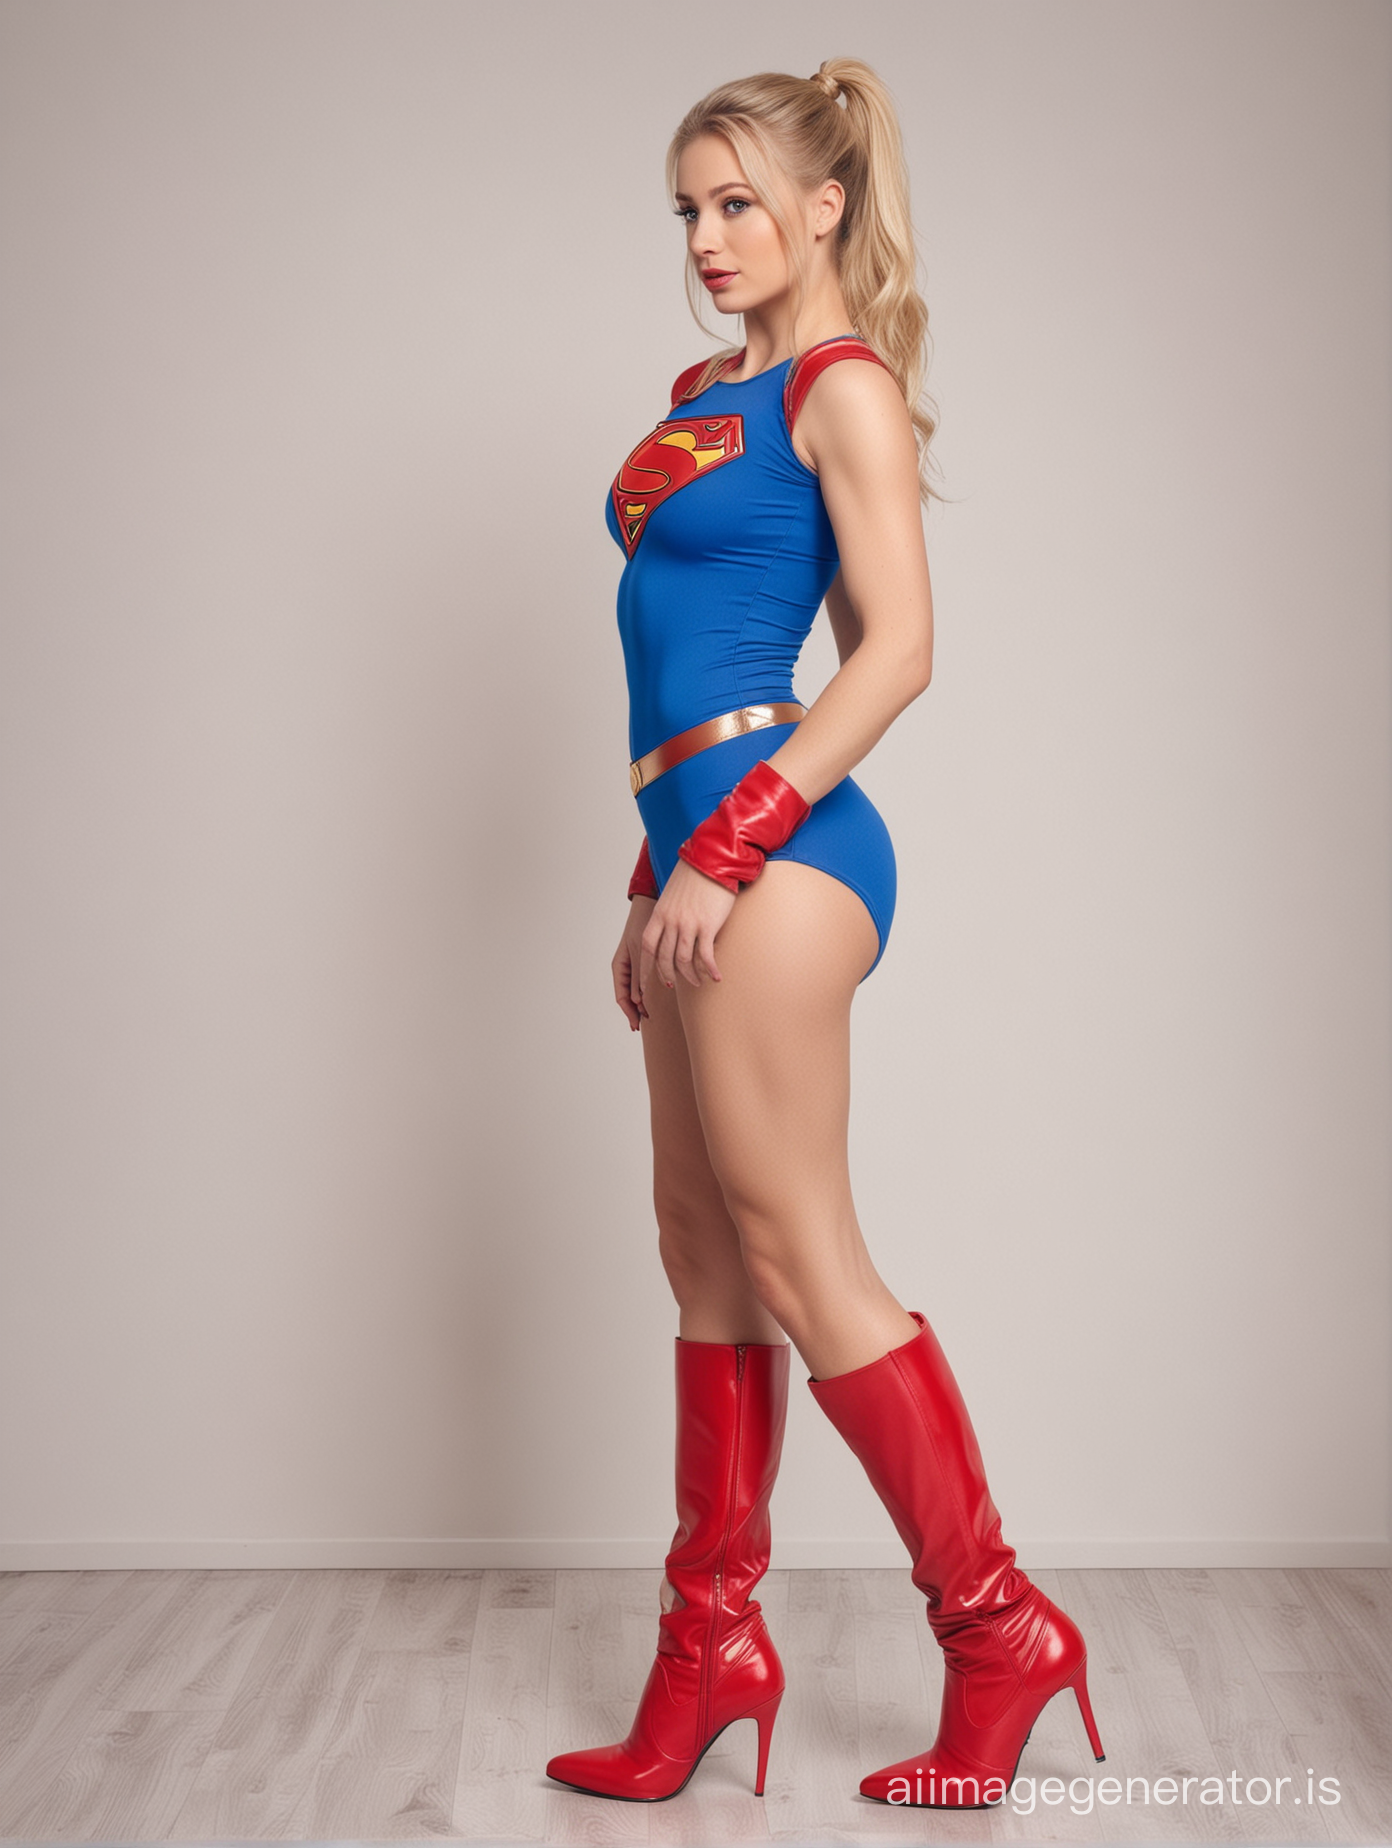 Medium height woman. Beautiful. Blond haïr in a ponytail. Blue eyes. Supergirl outfit with red boots high heels. Waiting for her lover. In front of a white wall